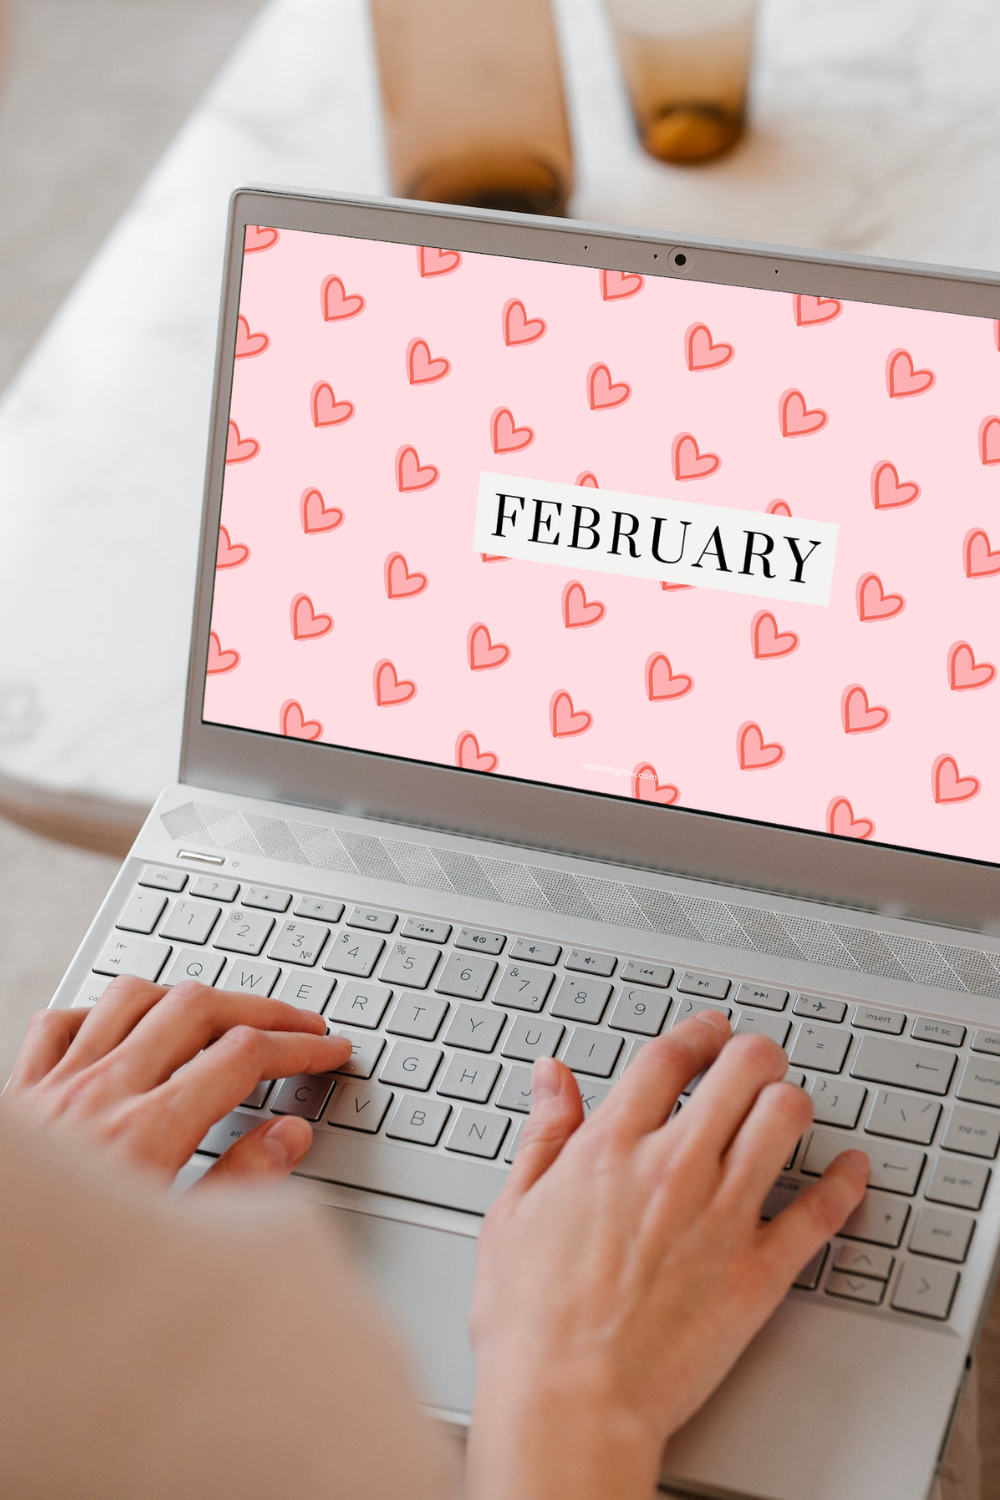 Inspire to Glow - February Tech Background Desktop Wallpaper with pink and red hearts - Valentine's and Galentine's day aesthetic